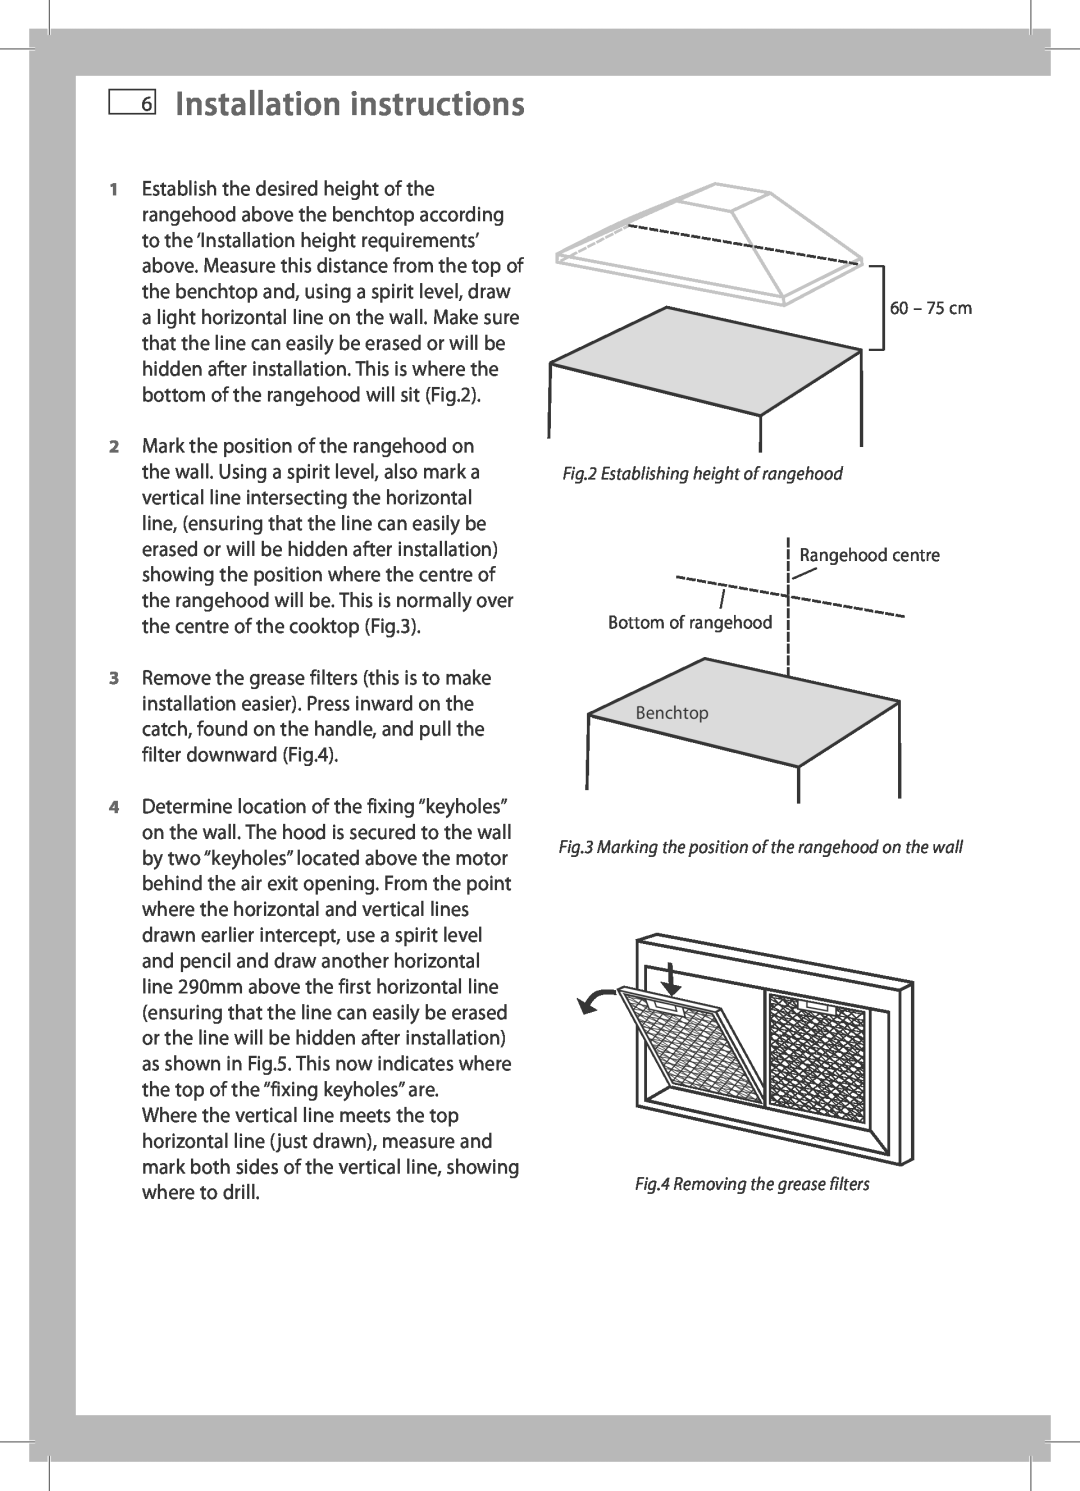 Fisher & Paykel HC60PCHTX2 Installation instructions, Establishing height of rangehood, Removing the grease filters 